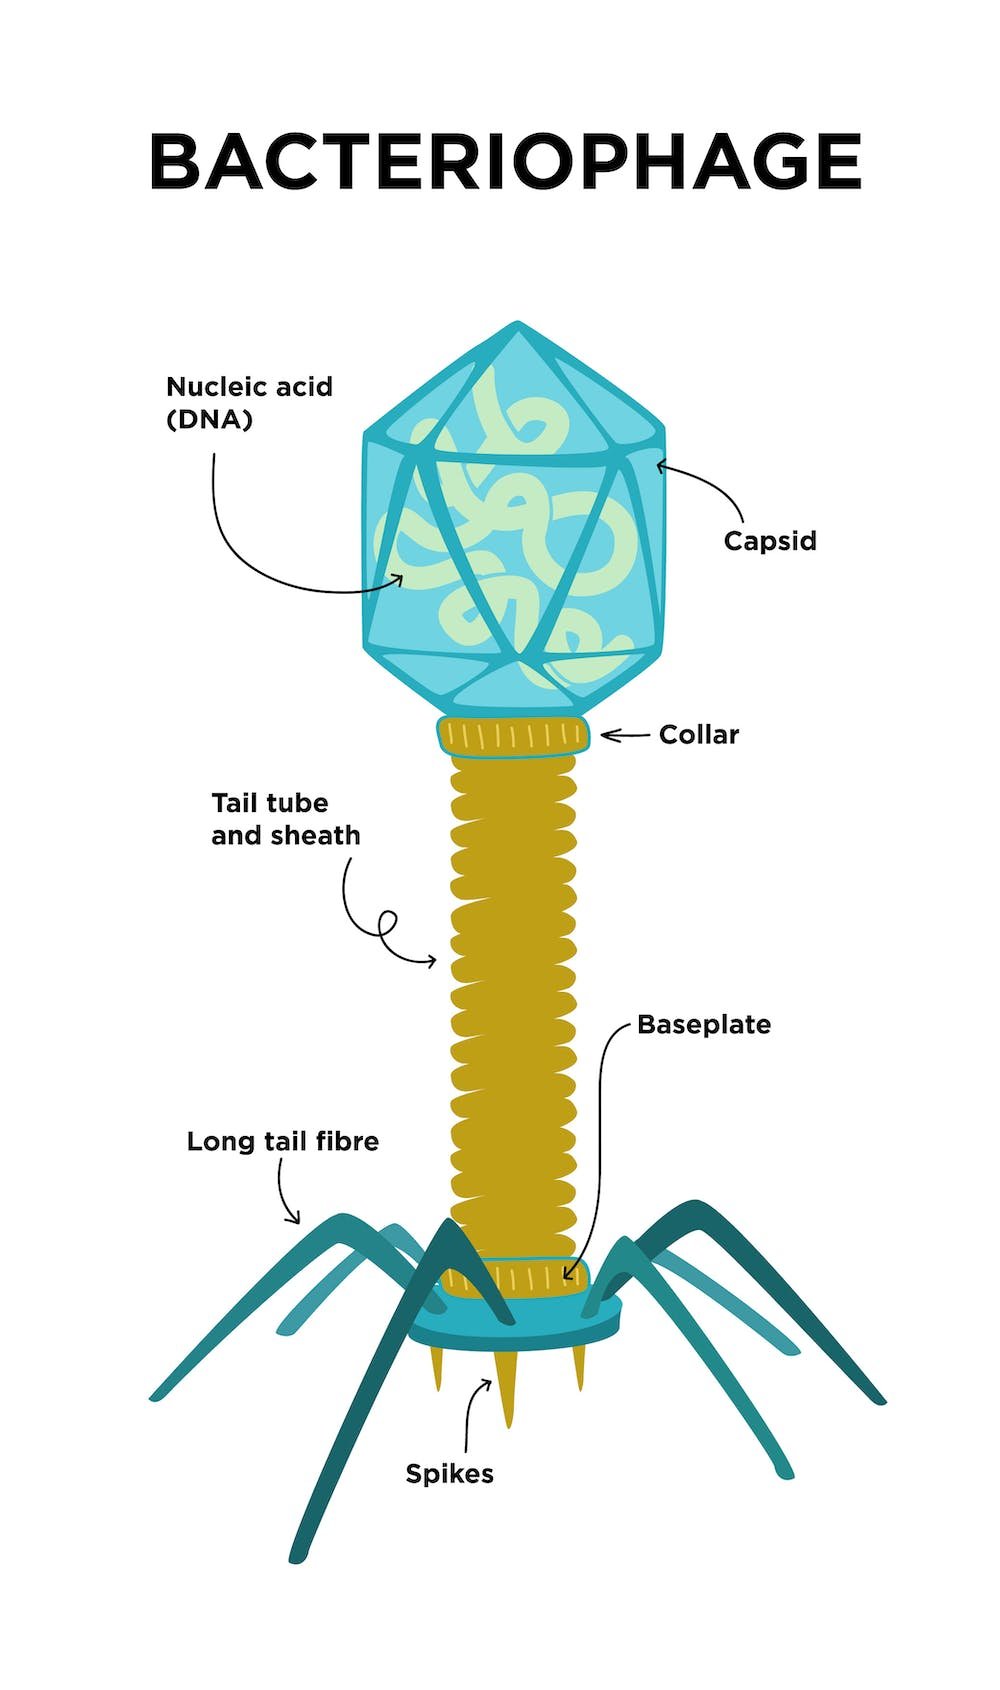 A Bacteriophage.